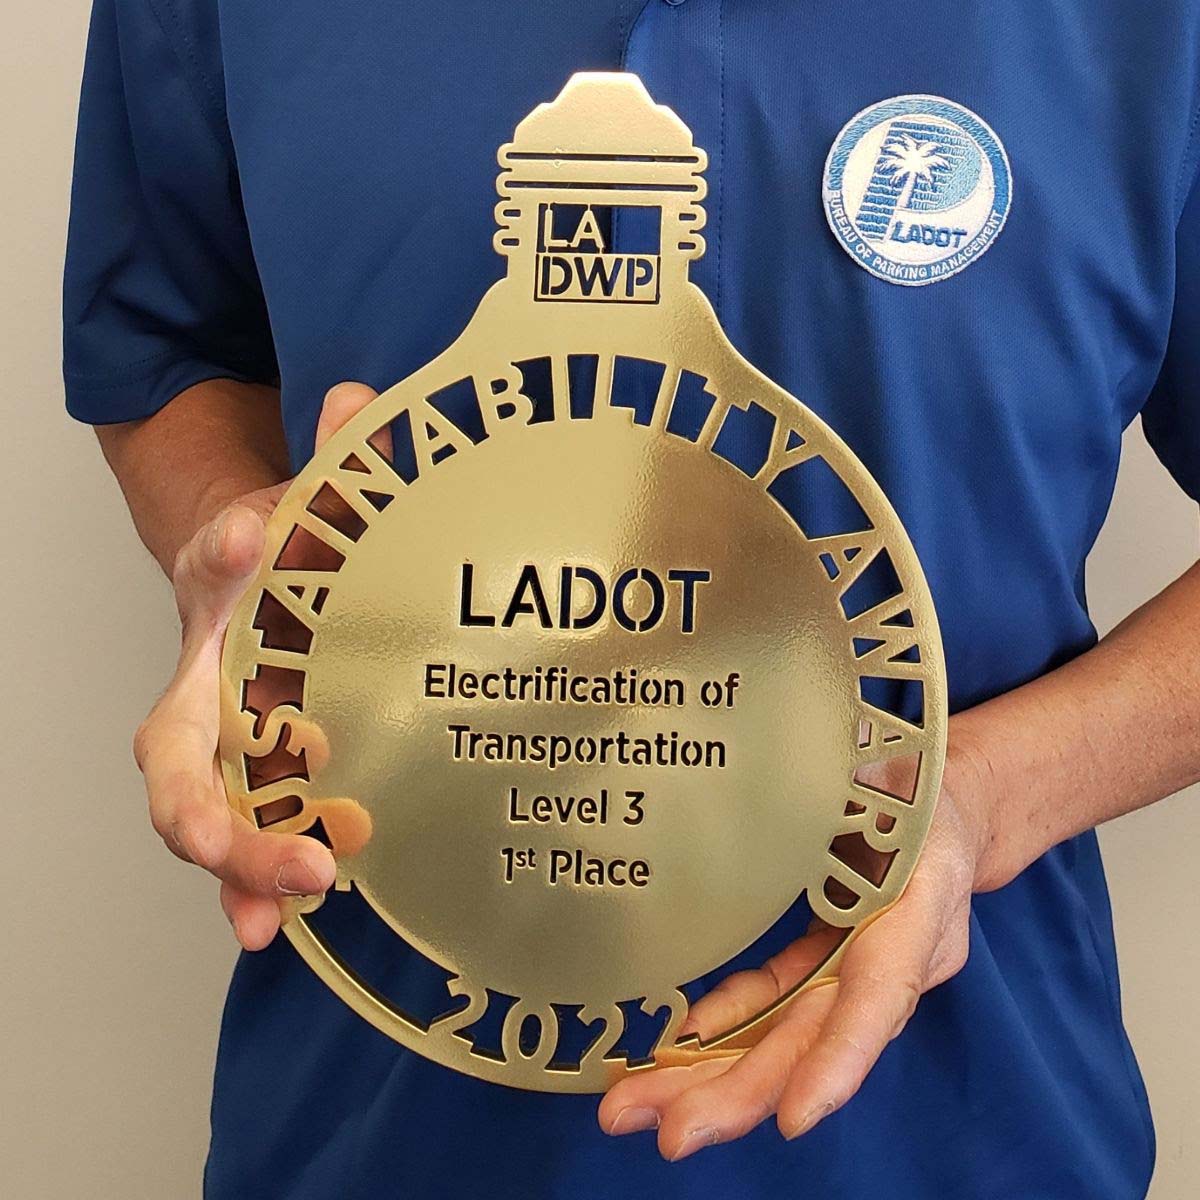 LADOT Wins Award for Transportation Electrification in Parking Facilities